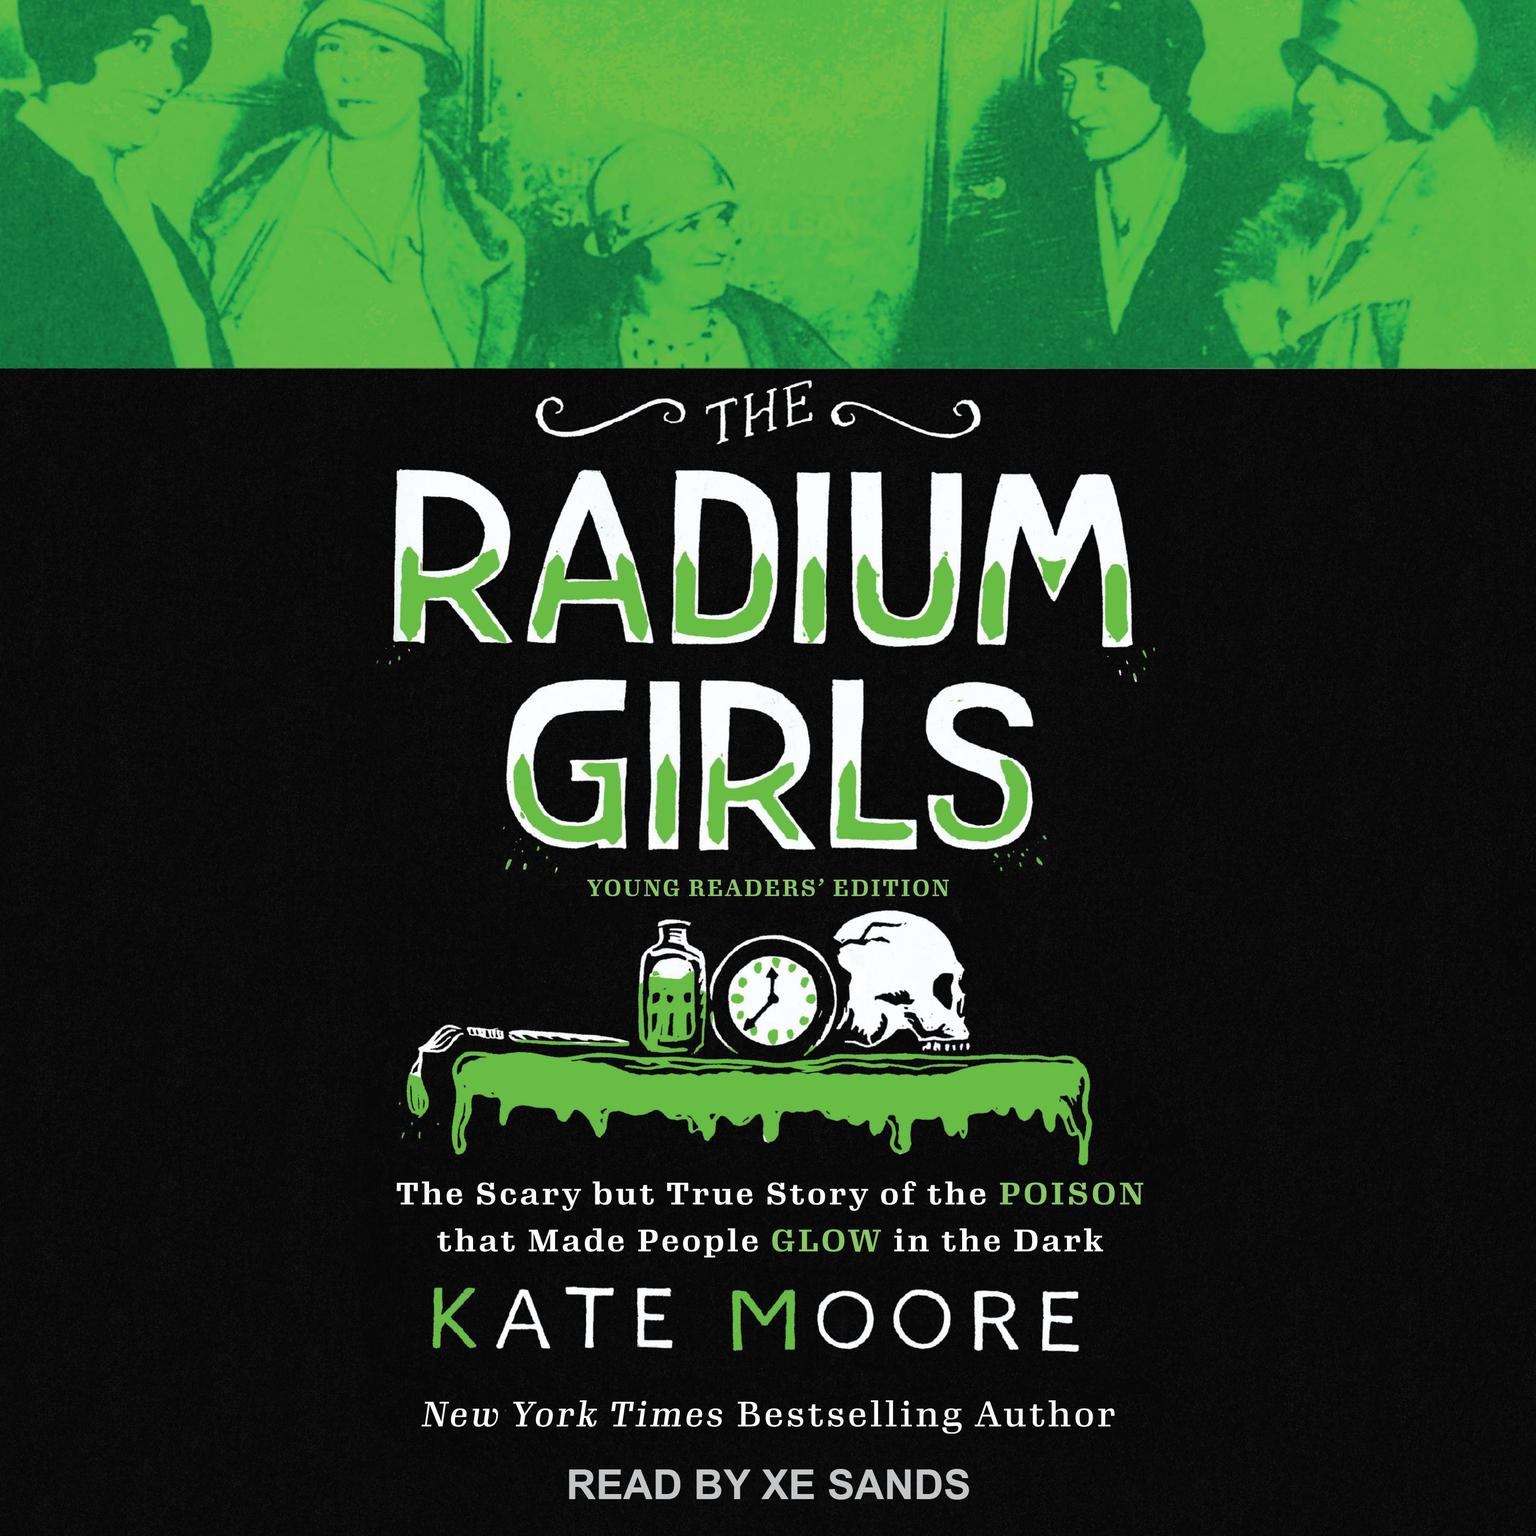 The Radium Girls: Young Readers Edition: The Scary but True Story of the Poison that Made People Glow in the Dark Audiobook, by Kate Moore